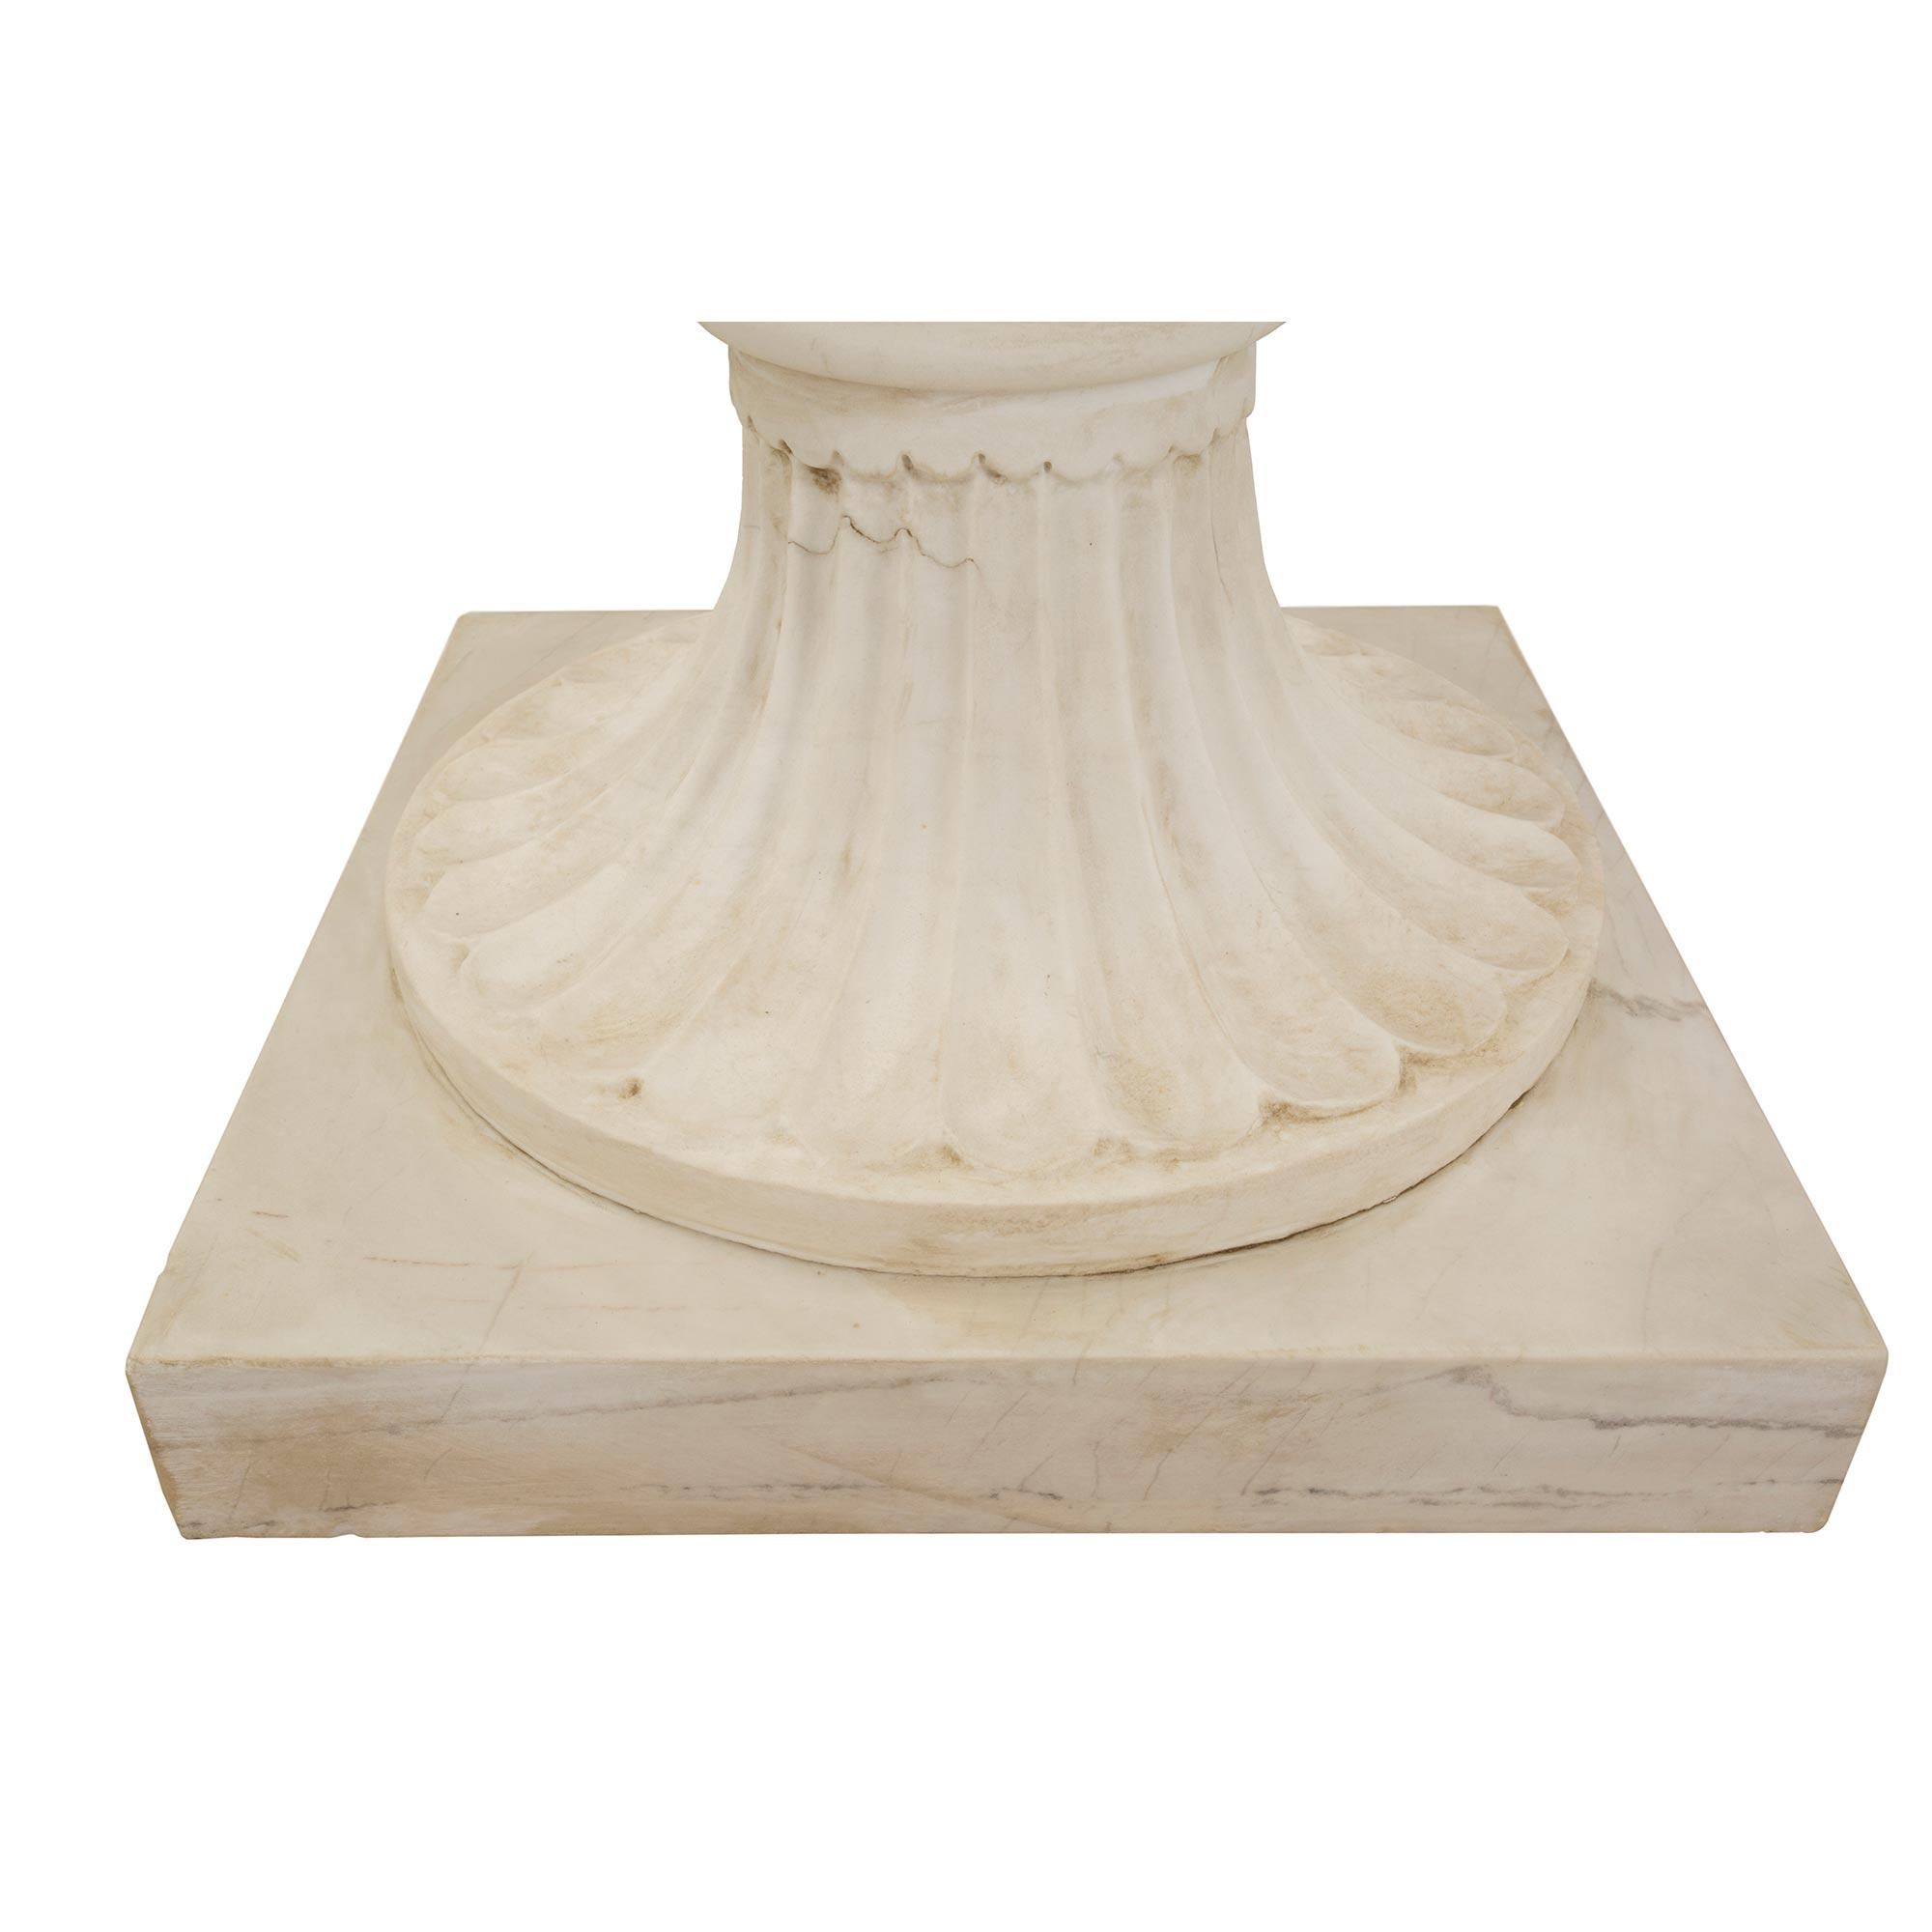 Pair of Italian 19th Century Large Scale White Carrara Marble Urns For Sale 3